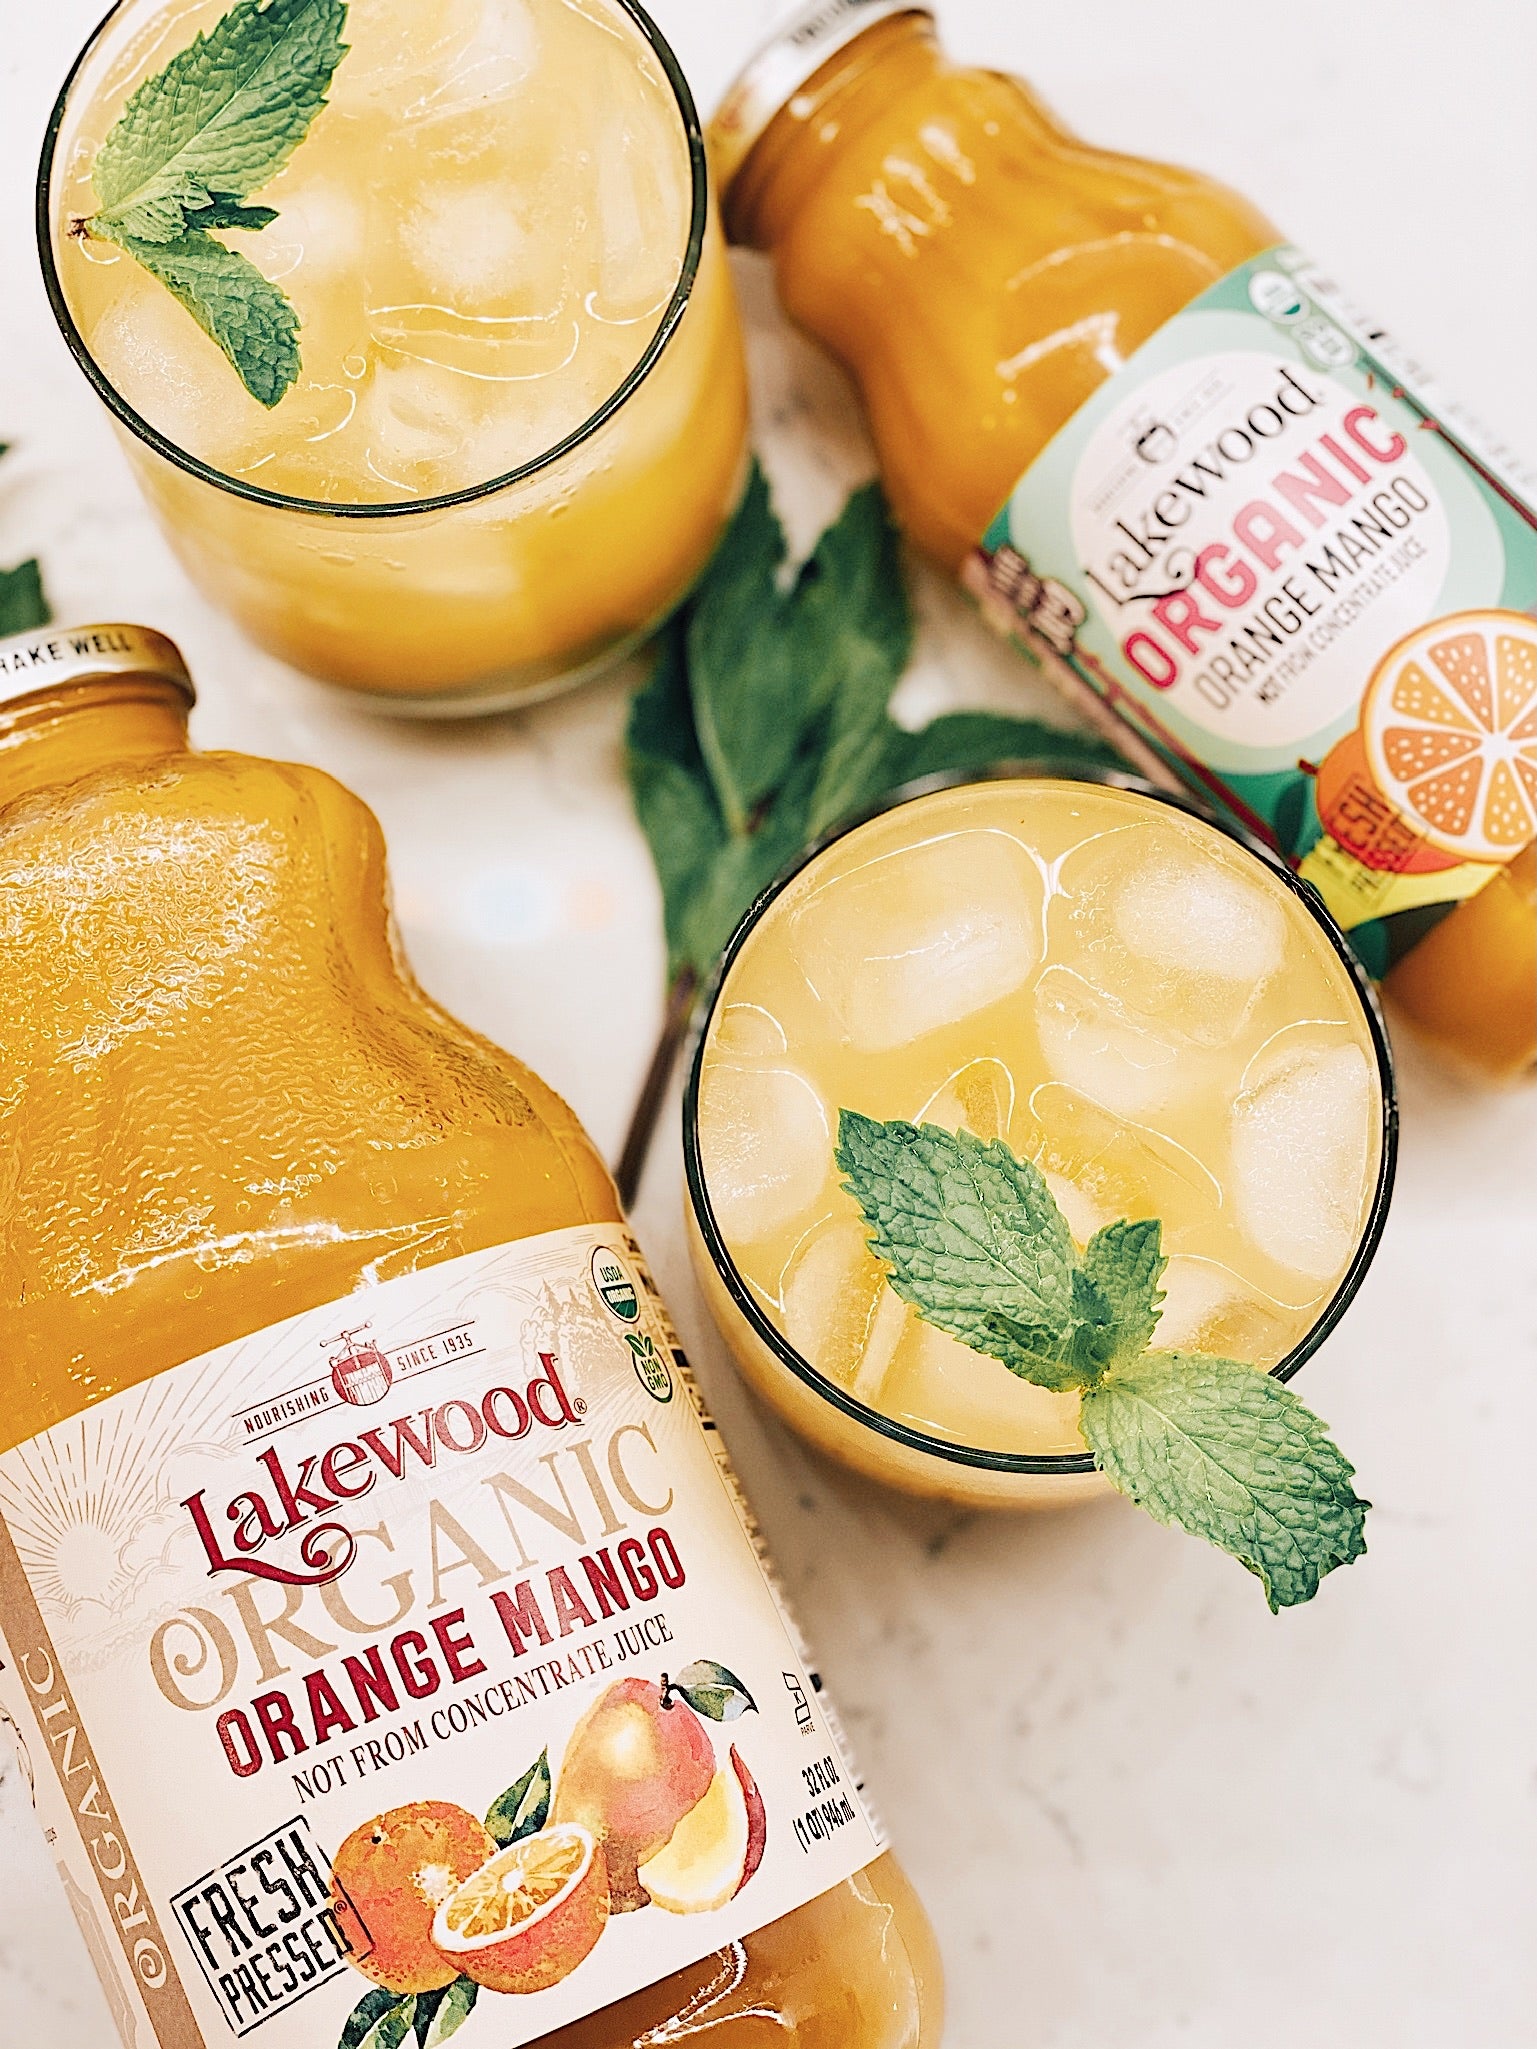 lakewood-organic-orange-mango-juice-blend-not-from-concentrate